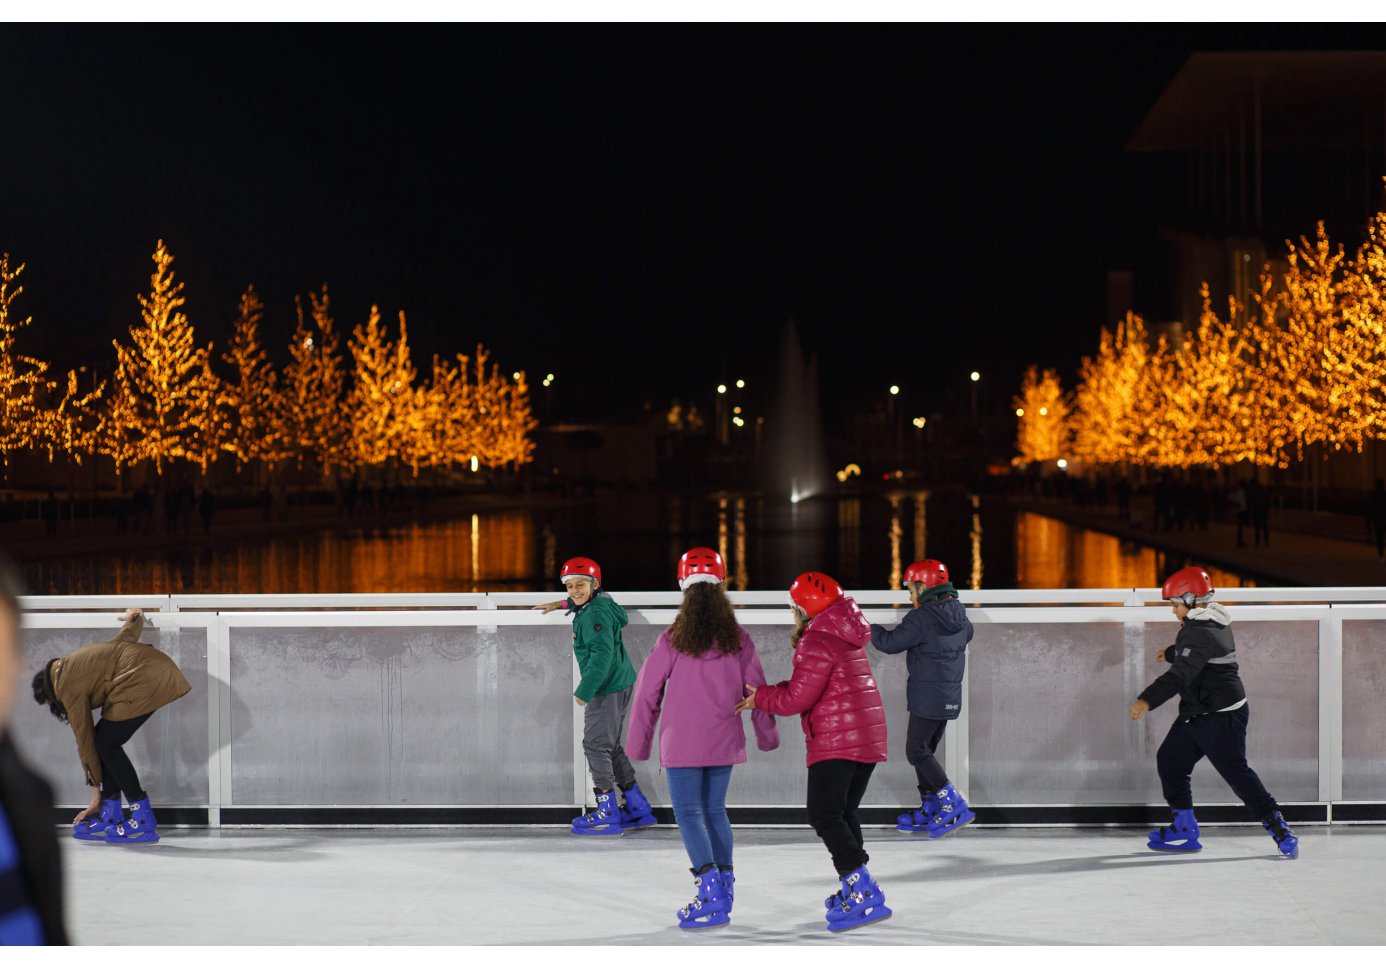 children skating on an ice rink, christmas-lit trees in the background, night-time